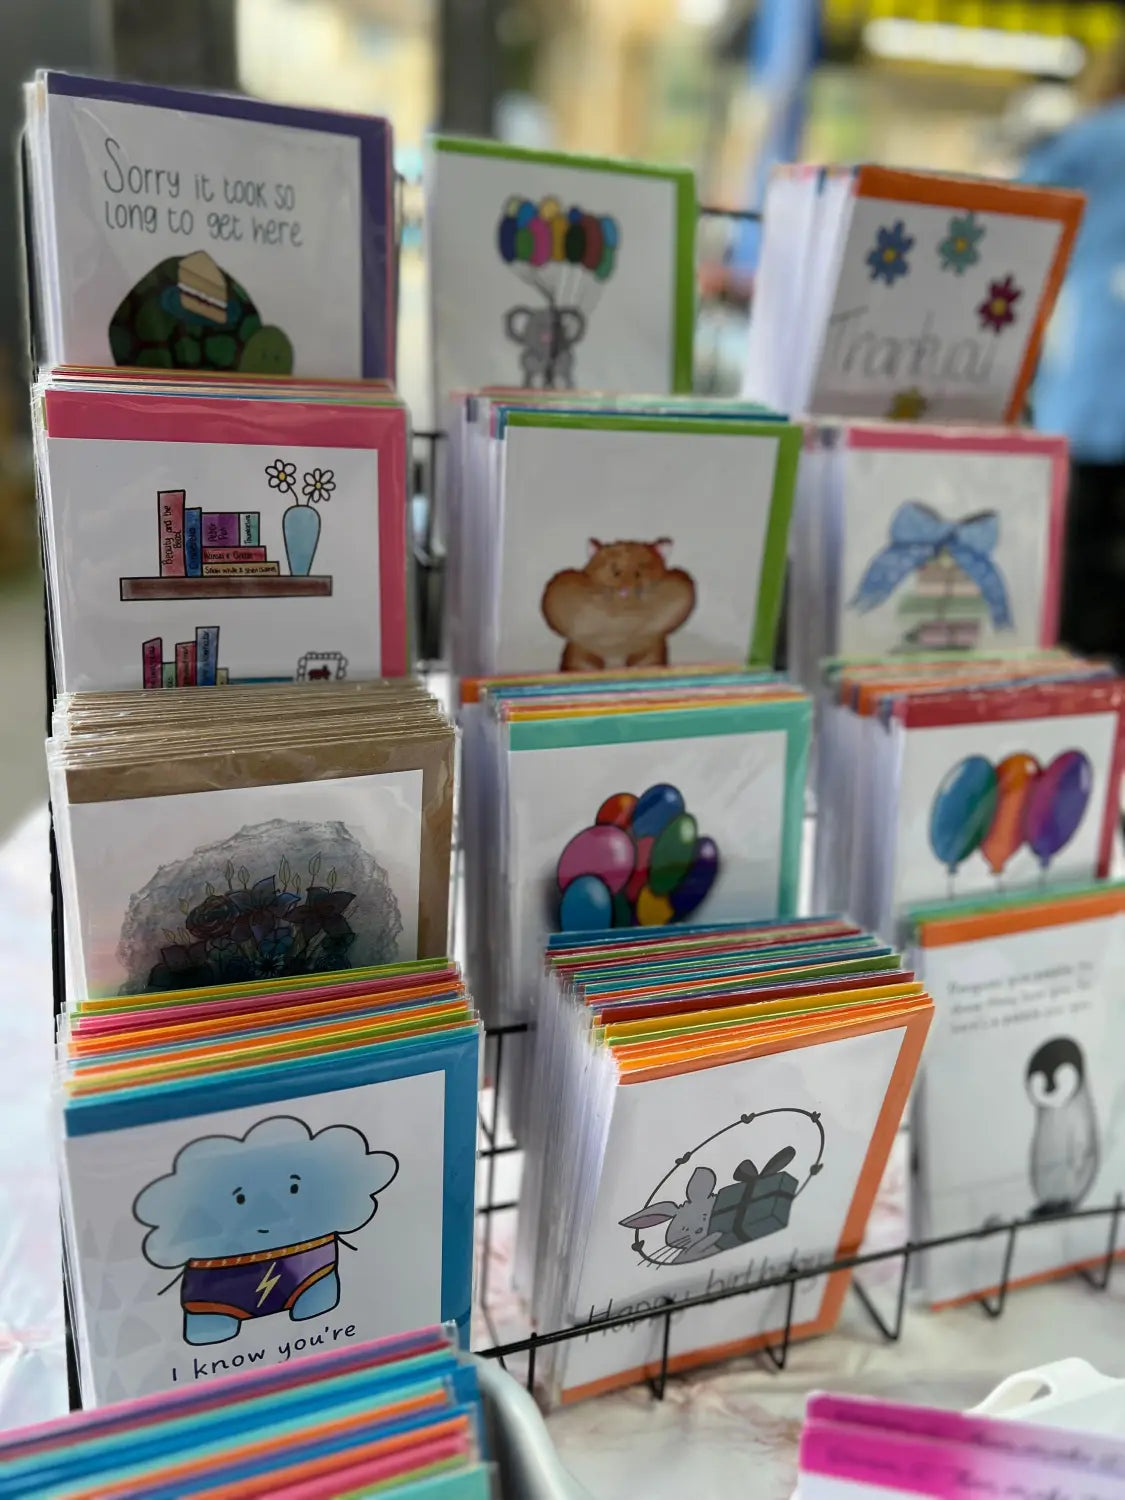 A tiered stand of 12 different greetings cards. The background is blurred out. 